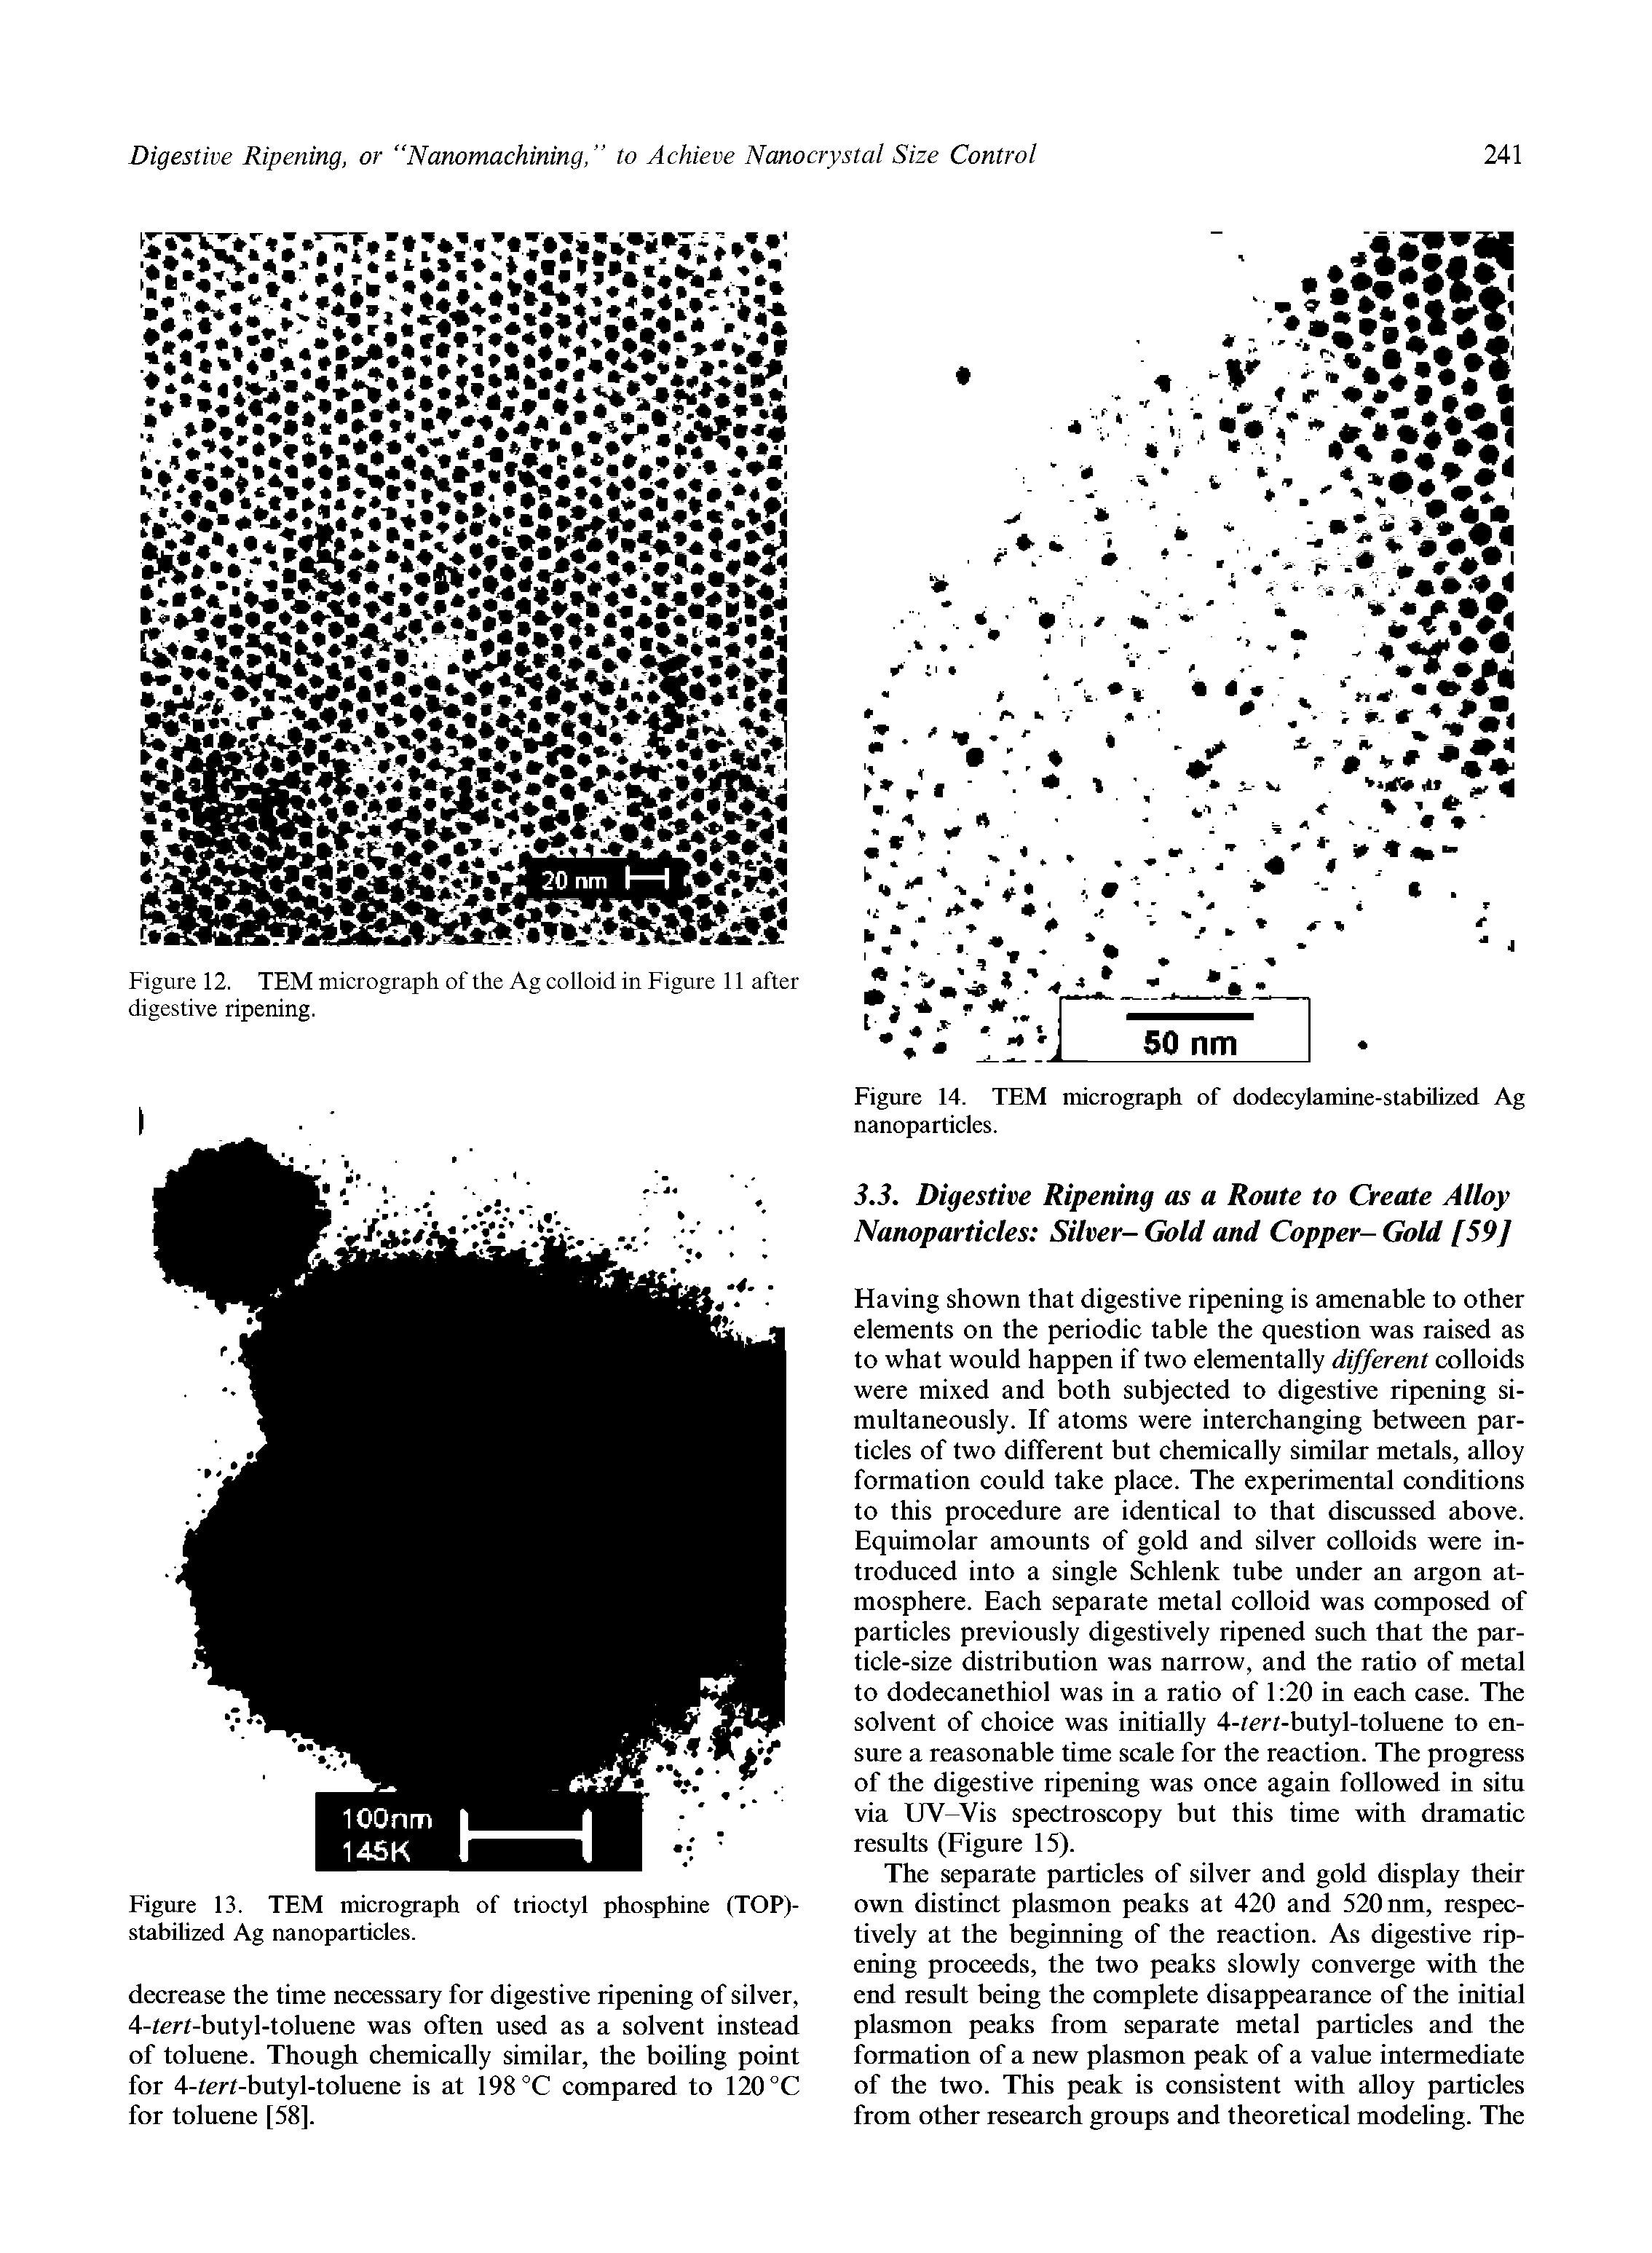 Figure 13. TEM micrograph of trioctyl phosphine (TOP)-stabilized Ag nanoparticles.